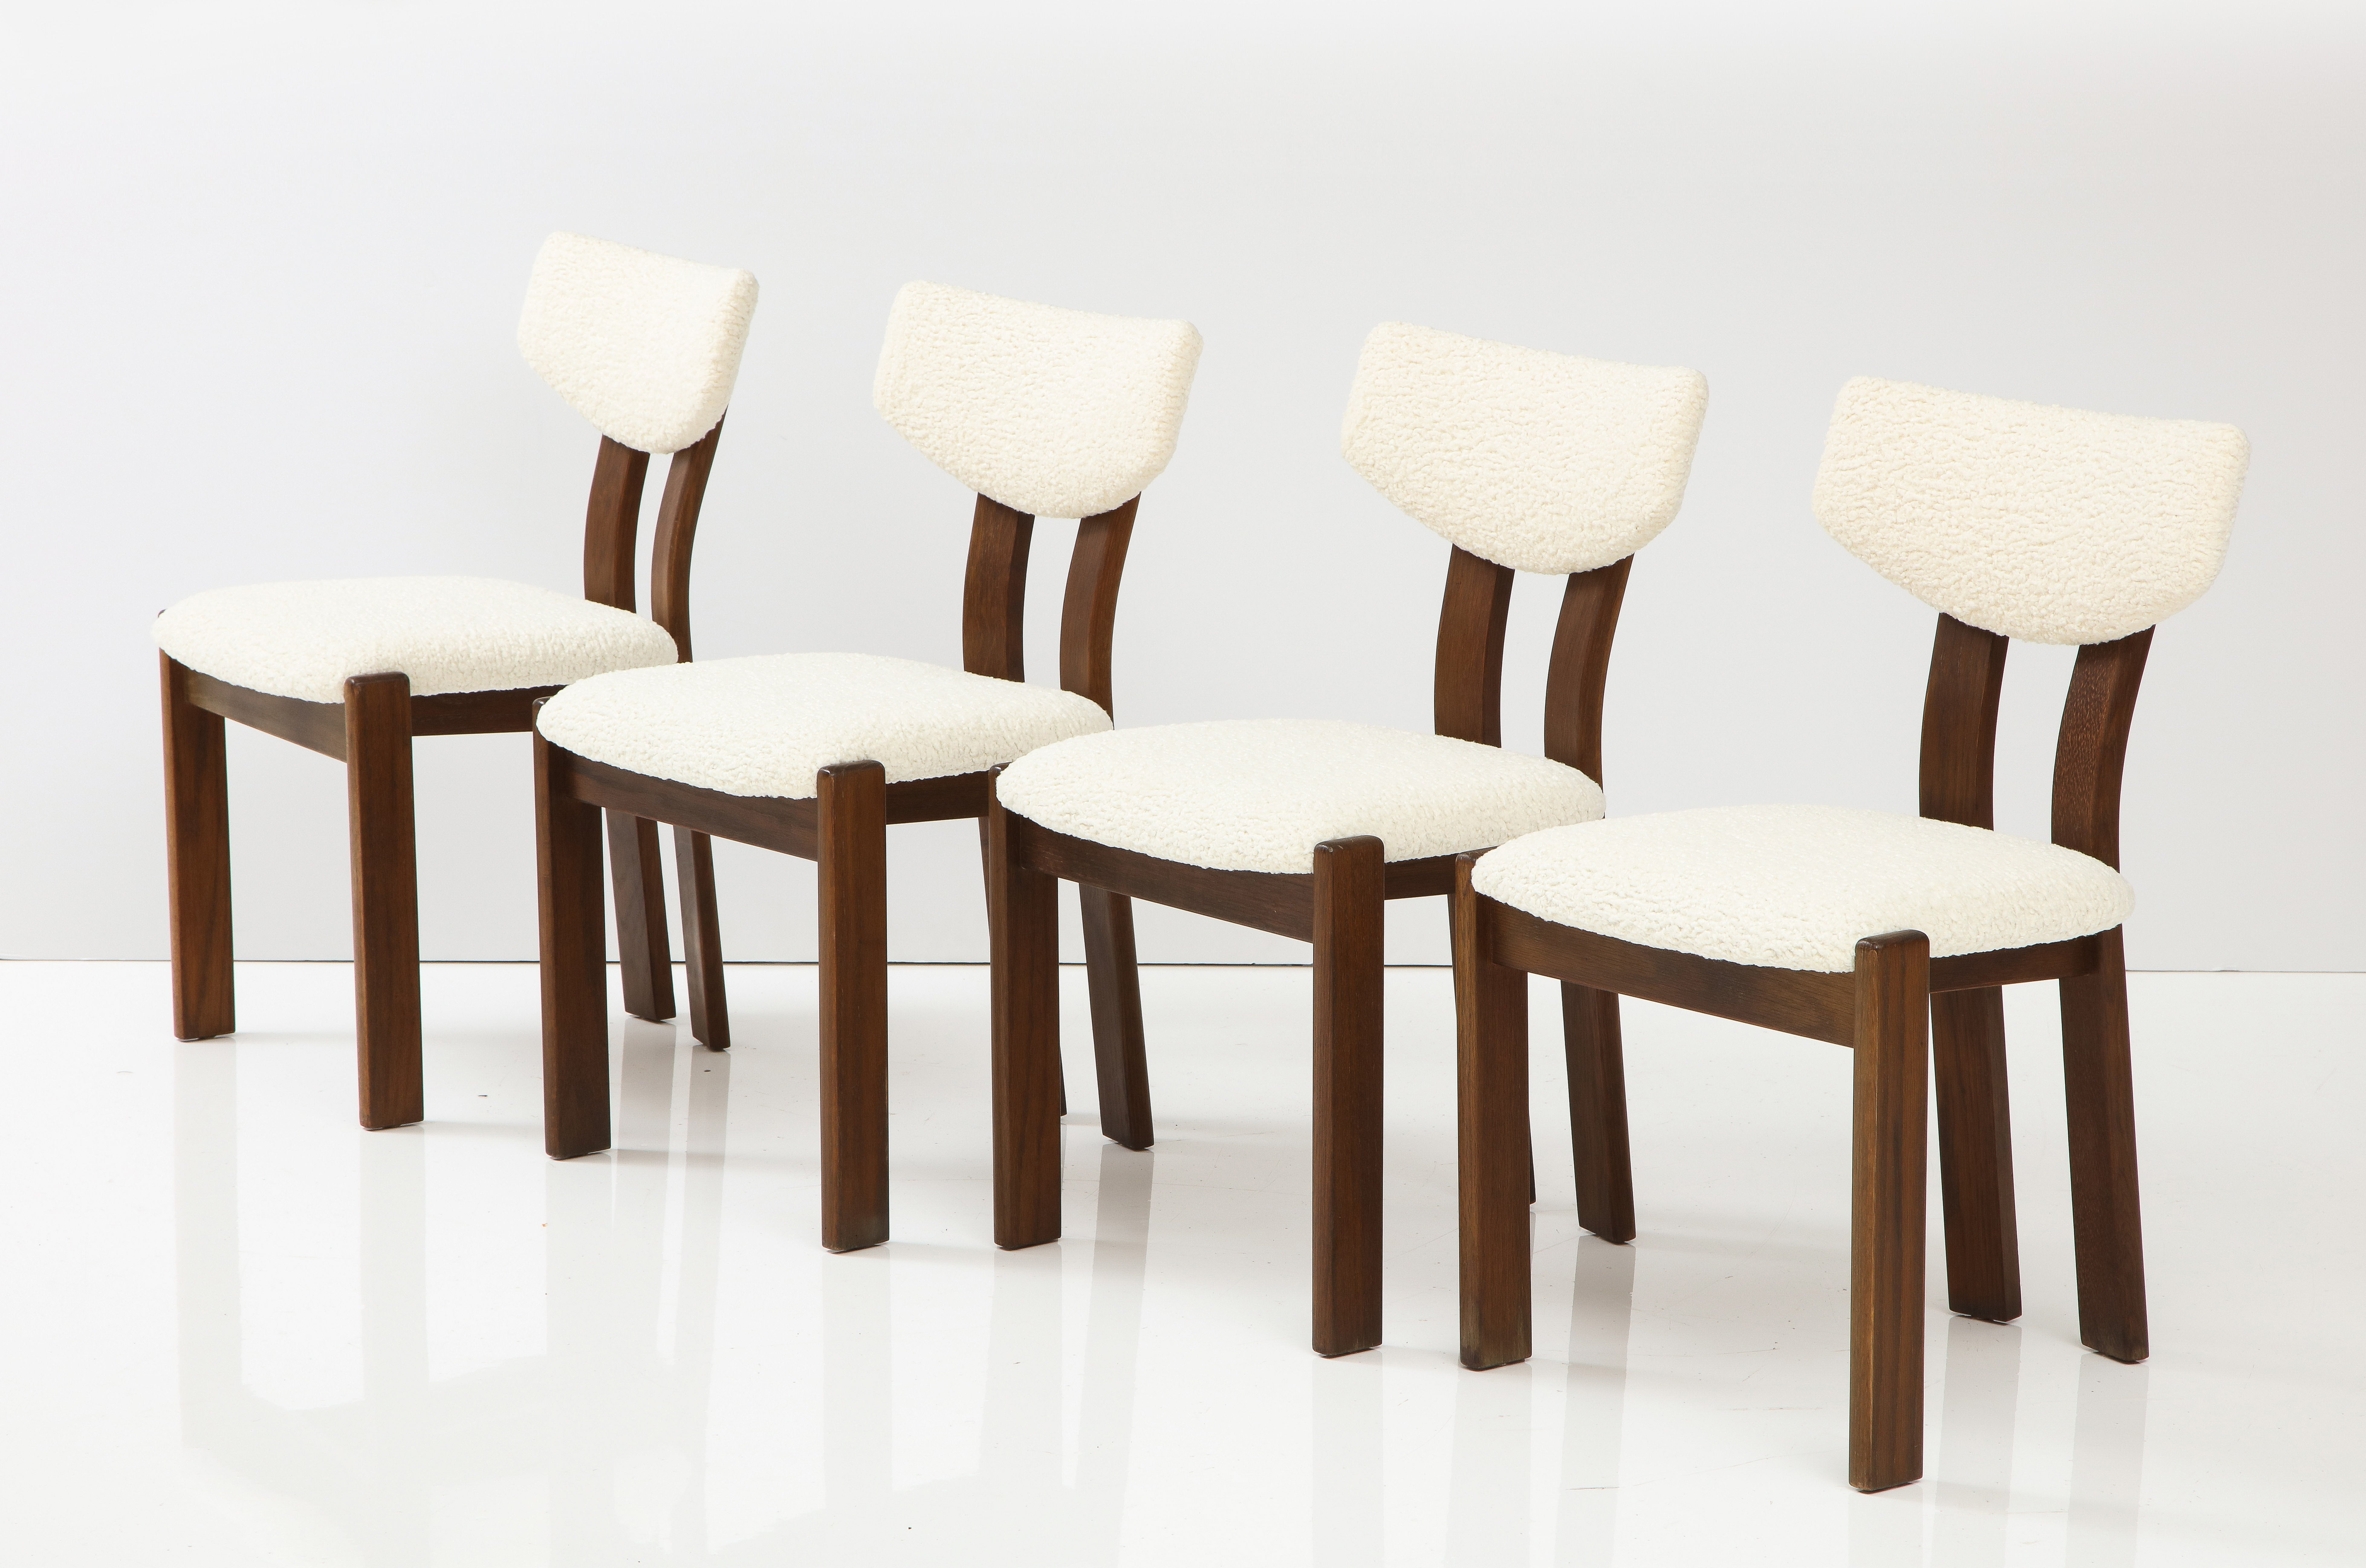 A set of four wonderfully sculpted teak dining chairs with upholstered seats and back rest; newly upholstered in a creamy/white boucle. Extremely versatile, comfortable and chic addition to any interior style. Wonderfully constructed, the chairs are